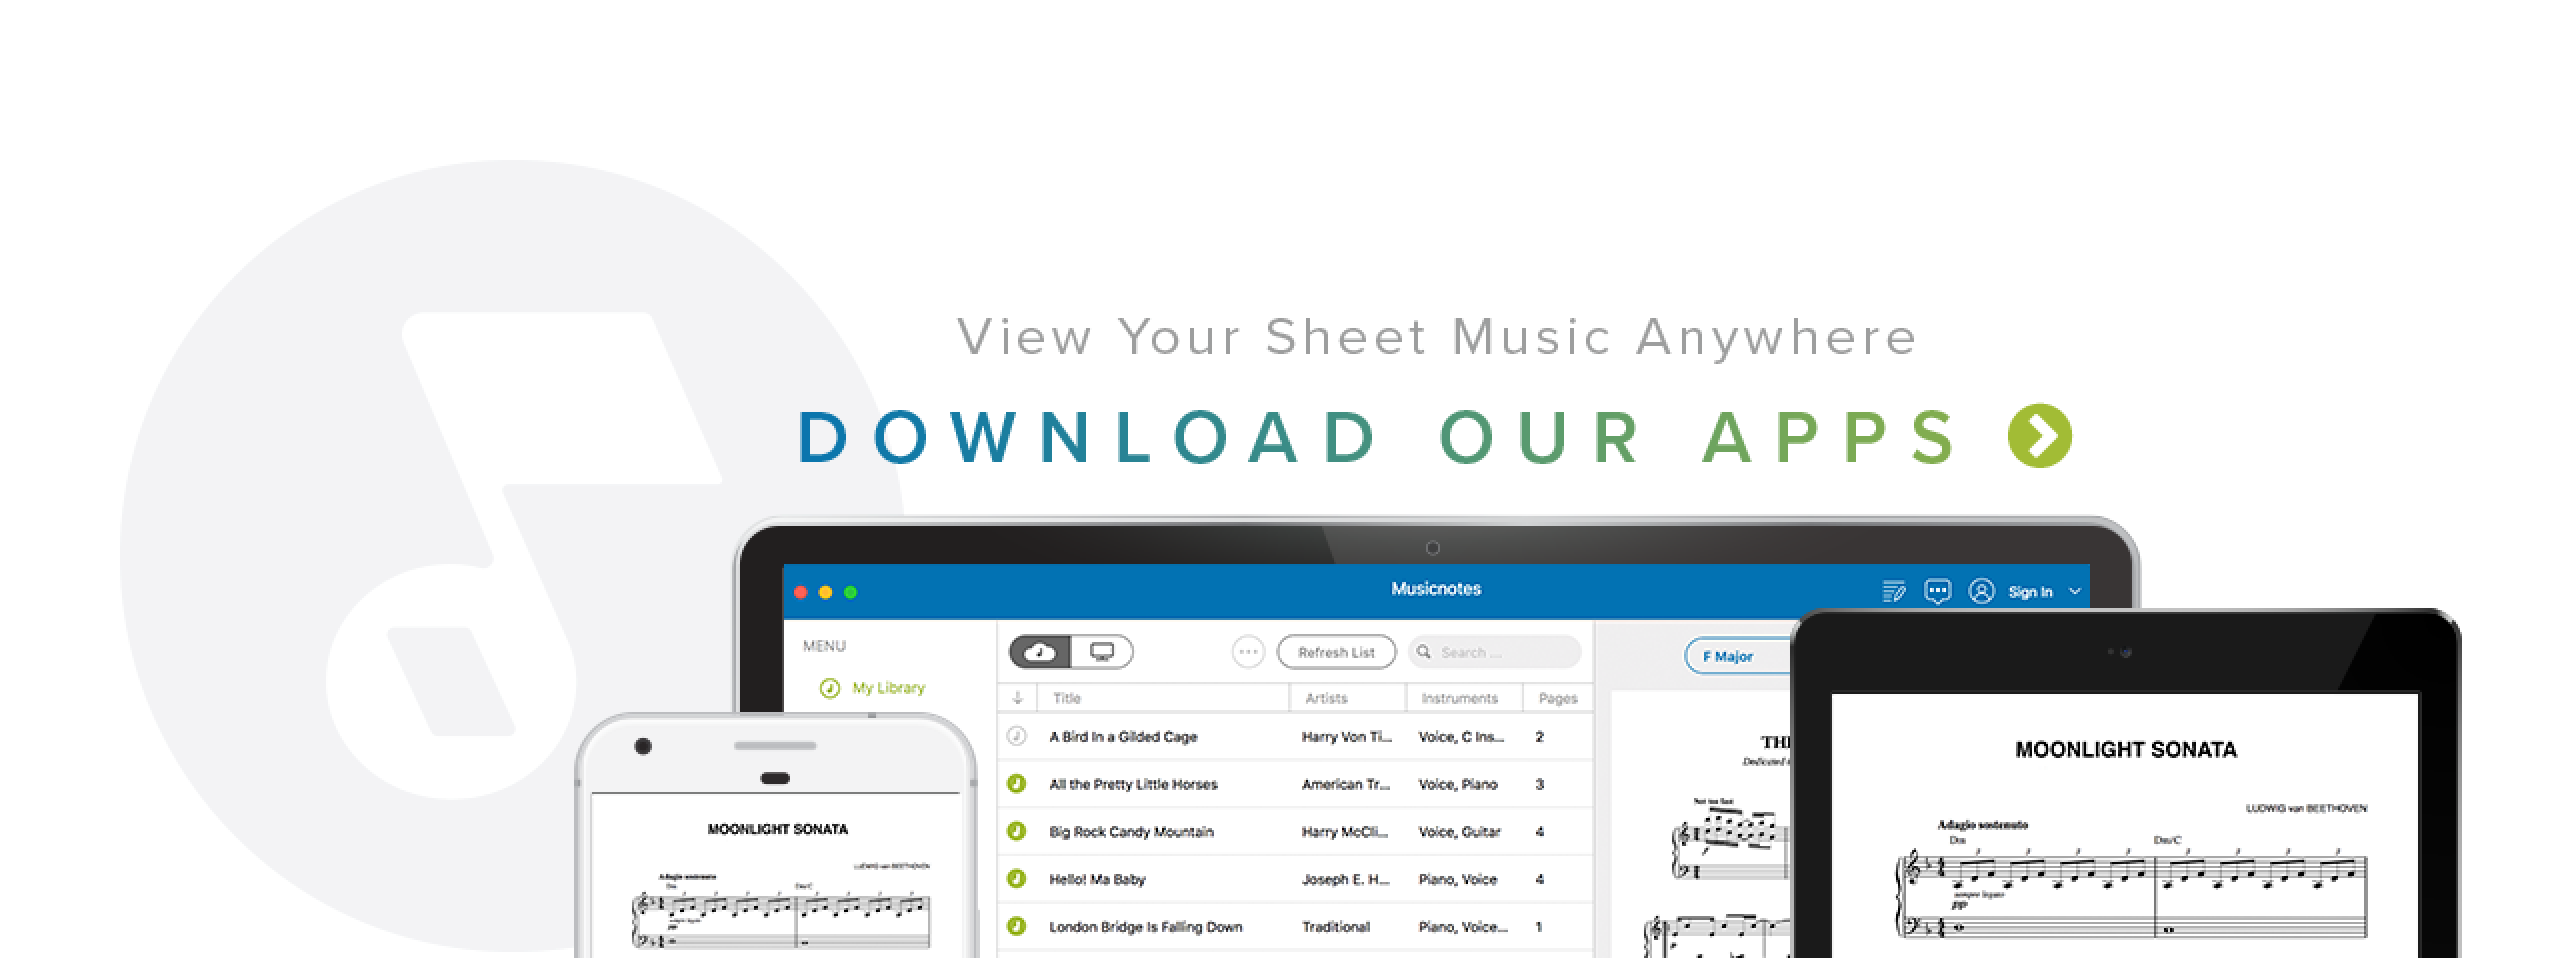 View Your Sheet Music Anywhere, Download our Apps